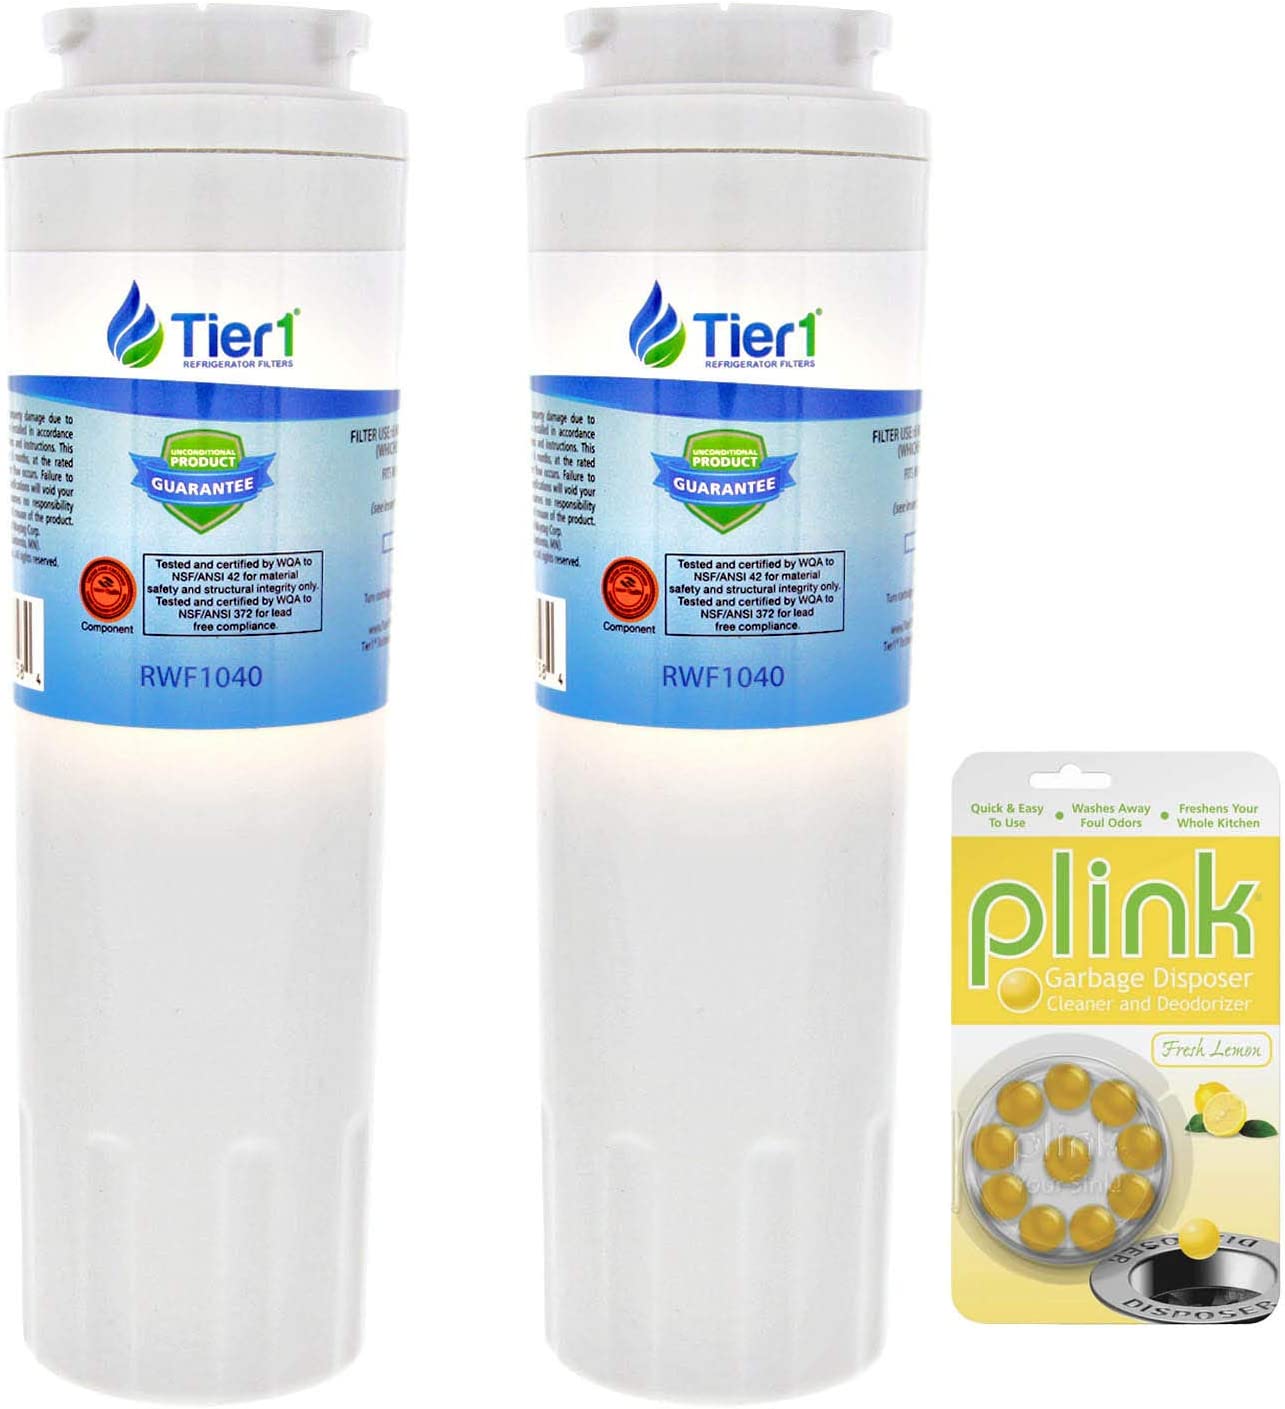 Tier1 Refrigerator Water Filter Replacement for Maytag UKF8001, EDR4RXD1, PUR, Jenn-Air, Puriclean II, 469006 (2 Pack) and Garbage Disposal Cleaner